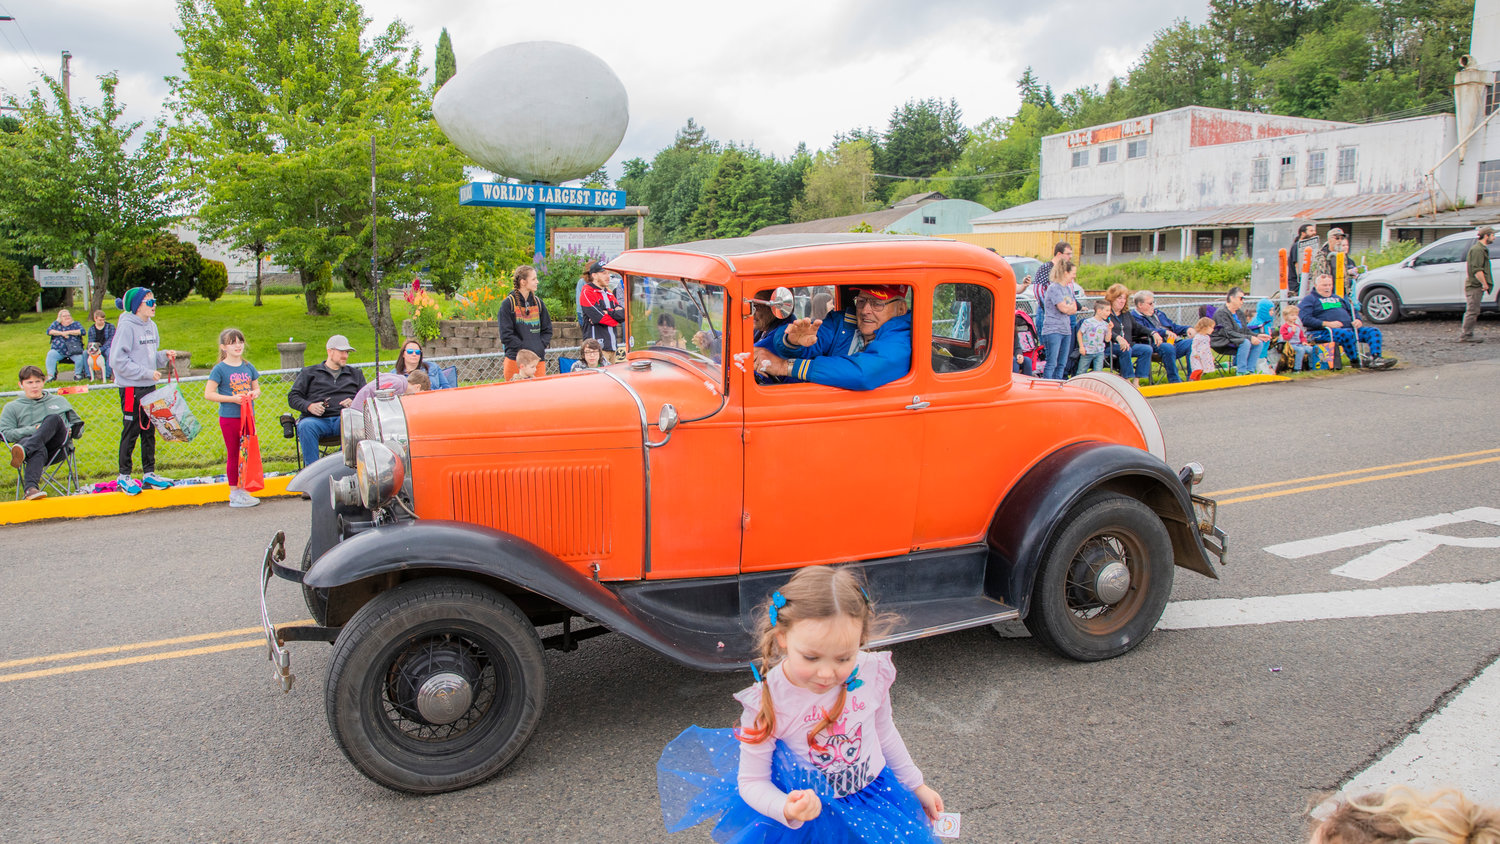 Candy is thrown from vintage cars in front of the “World’s Largest Egg,” during the Egg Days Festival parade in Winlock on Saturday.